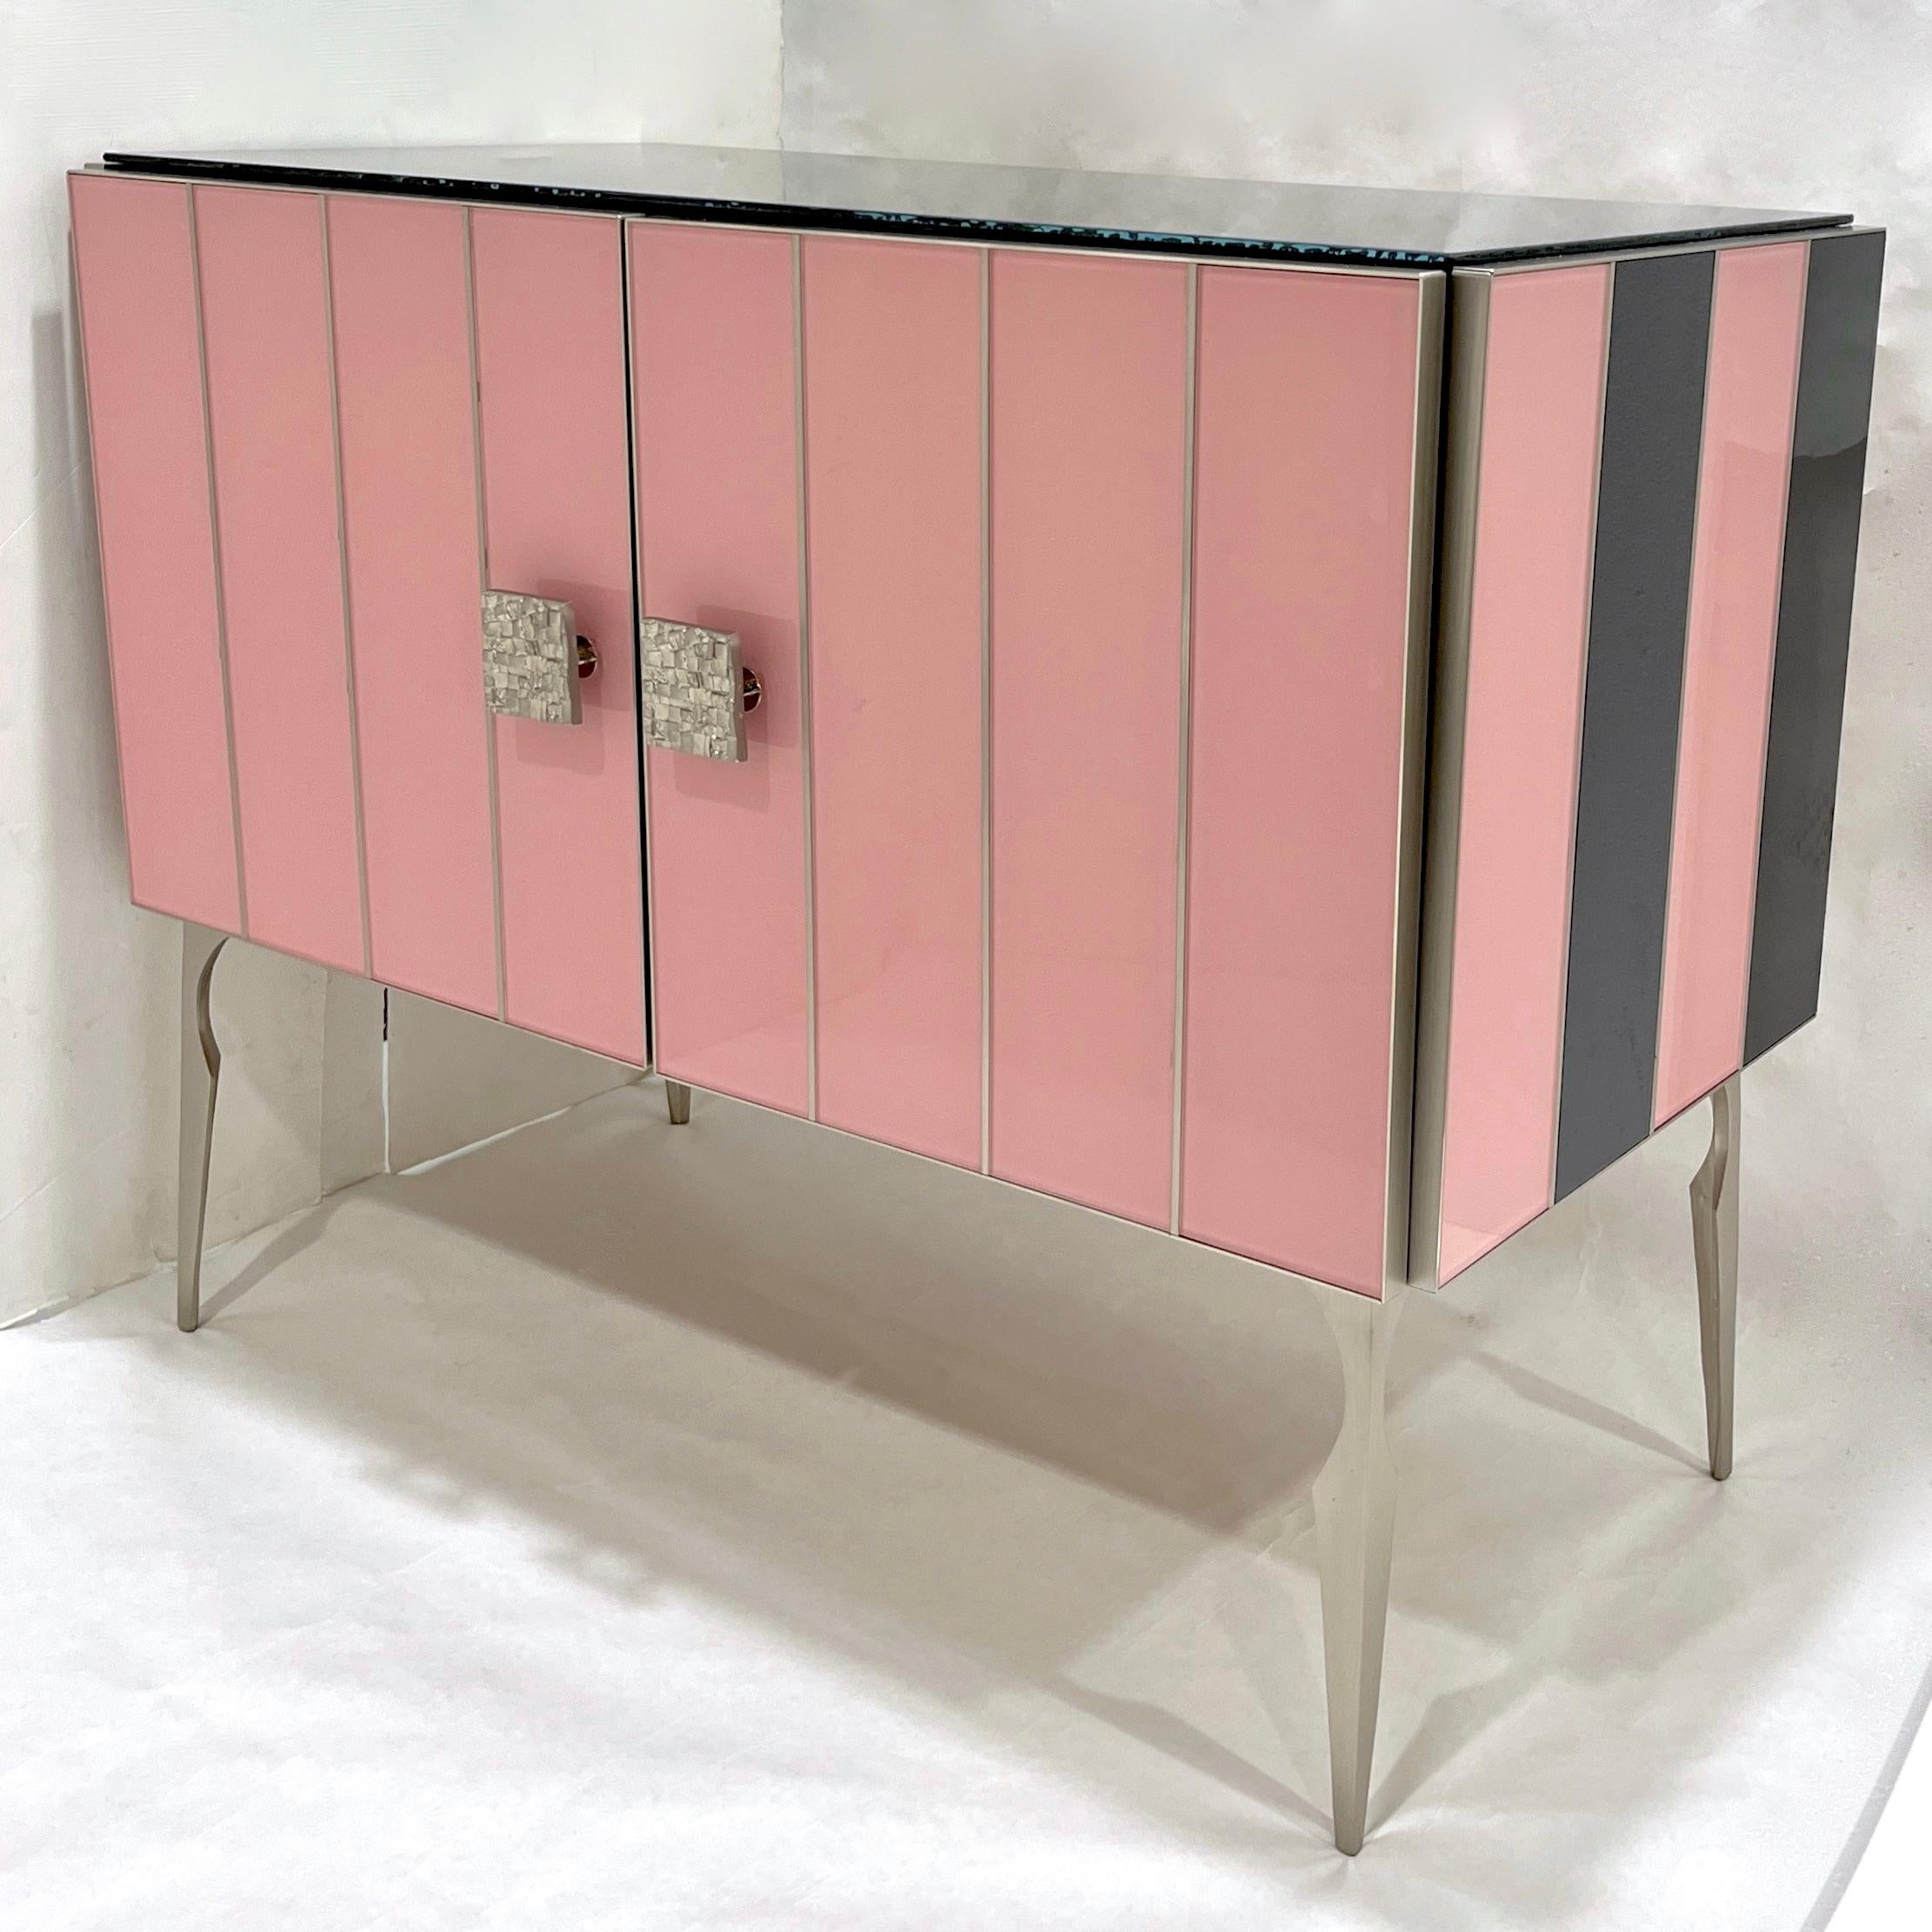 Bring glamour to your room with this bespoke customizable modern cabinet, entirely handcrafted in Italy, with a Hollywood Regency feel. The surround is decorated with art glass in a striking soft pink salmon rose color and jet black on the sides and